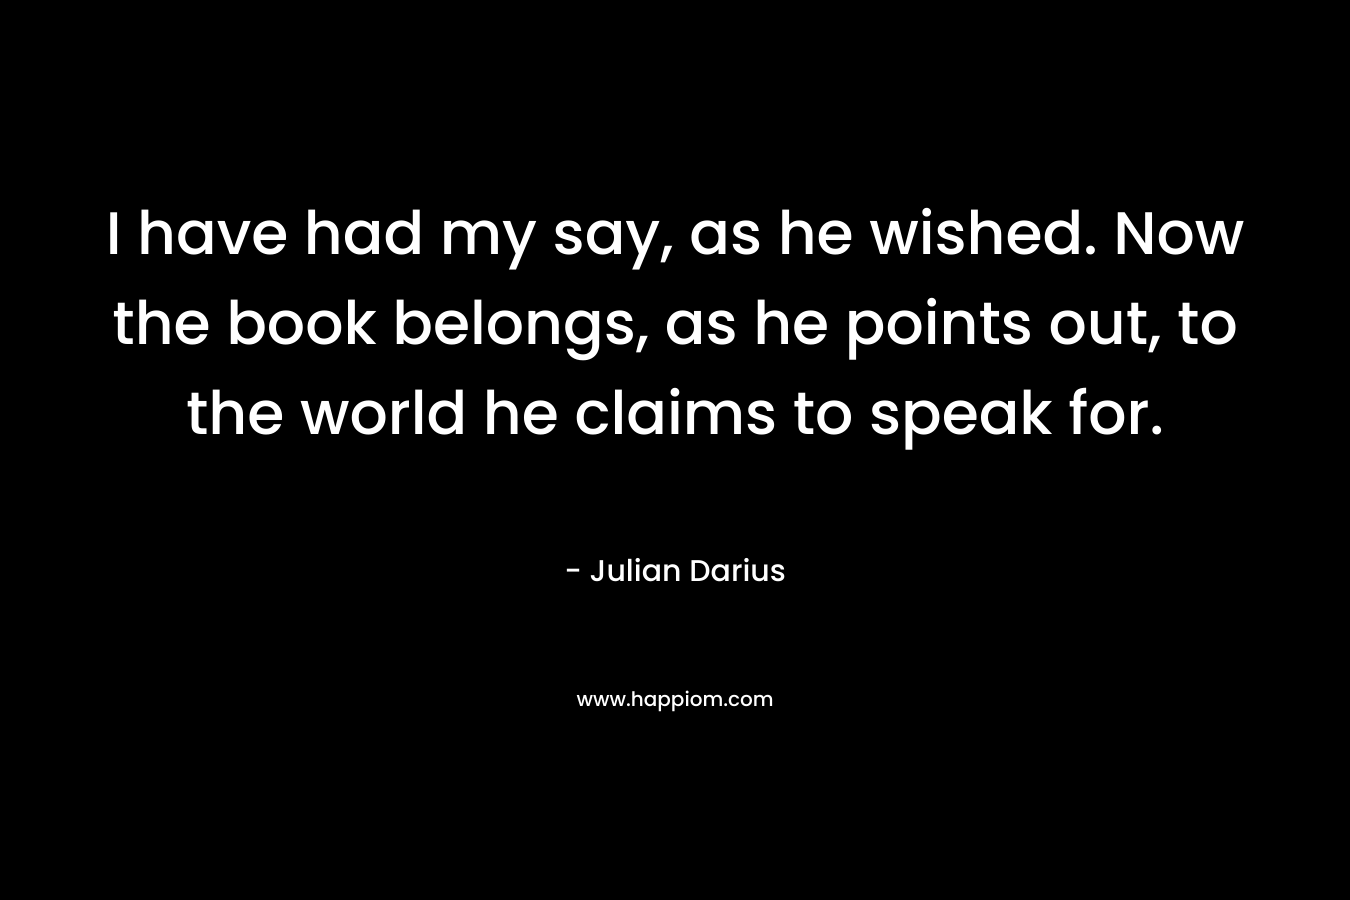 I have had my say, as he wished. Now the book belongs, as he points out, to the world he claims to speak for. – Julian Darius